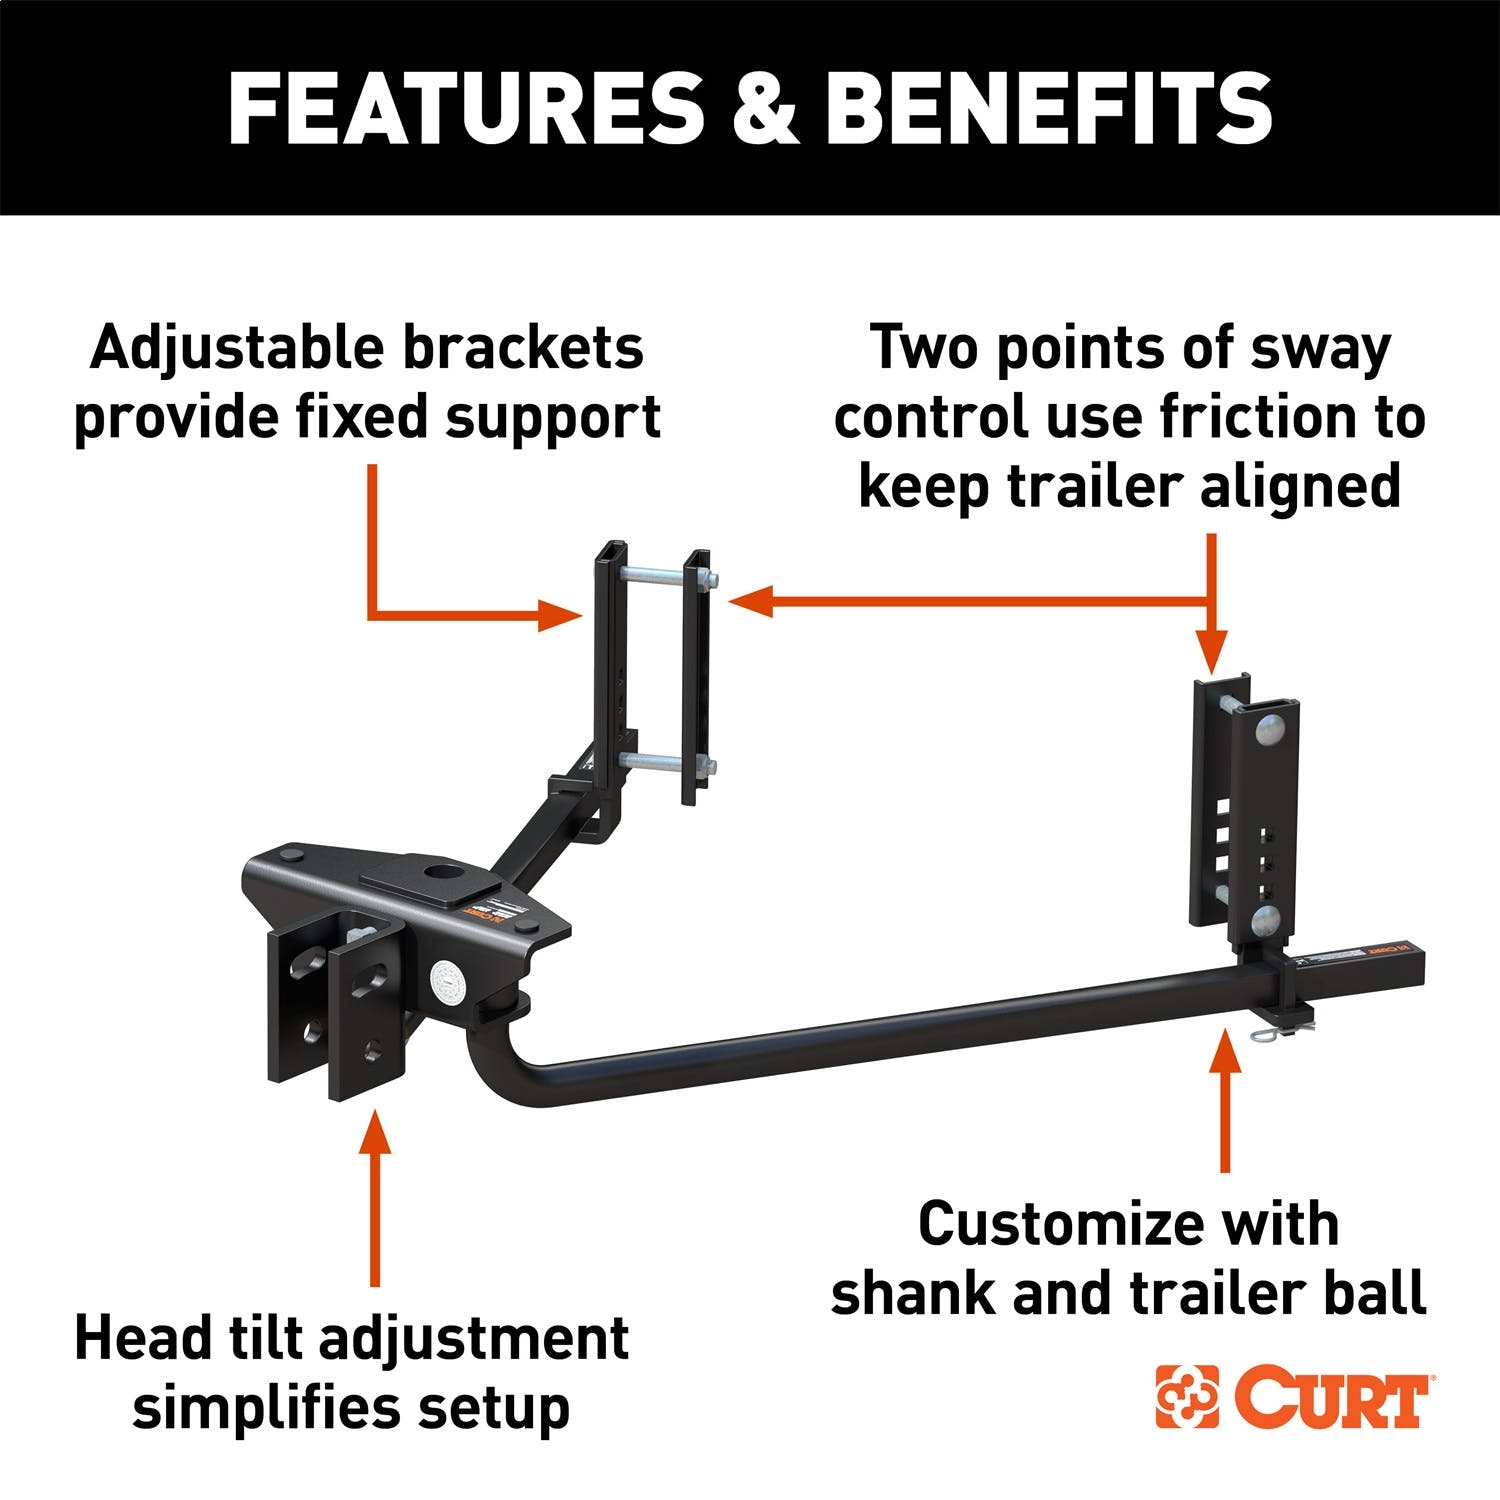 CURT 17600 TruTrack 2P Weight Distribution Hitch with 2x Sway Control, 8-10K (No Shank)